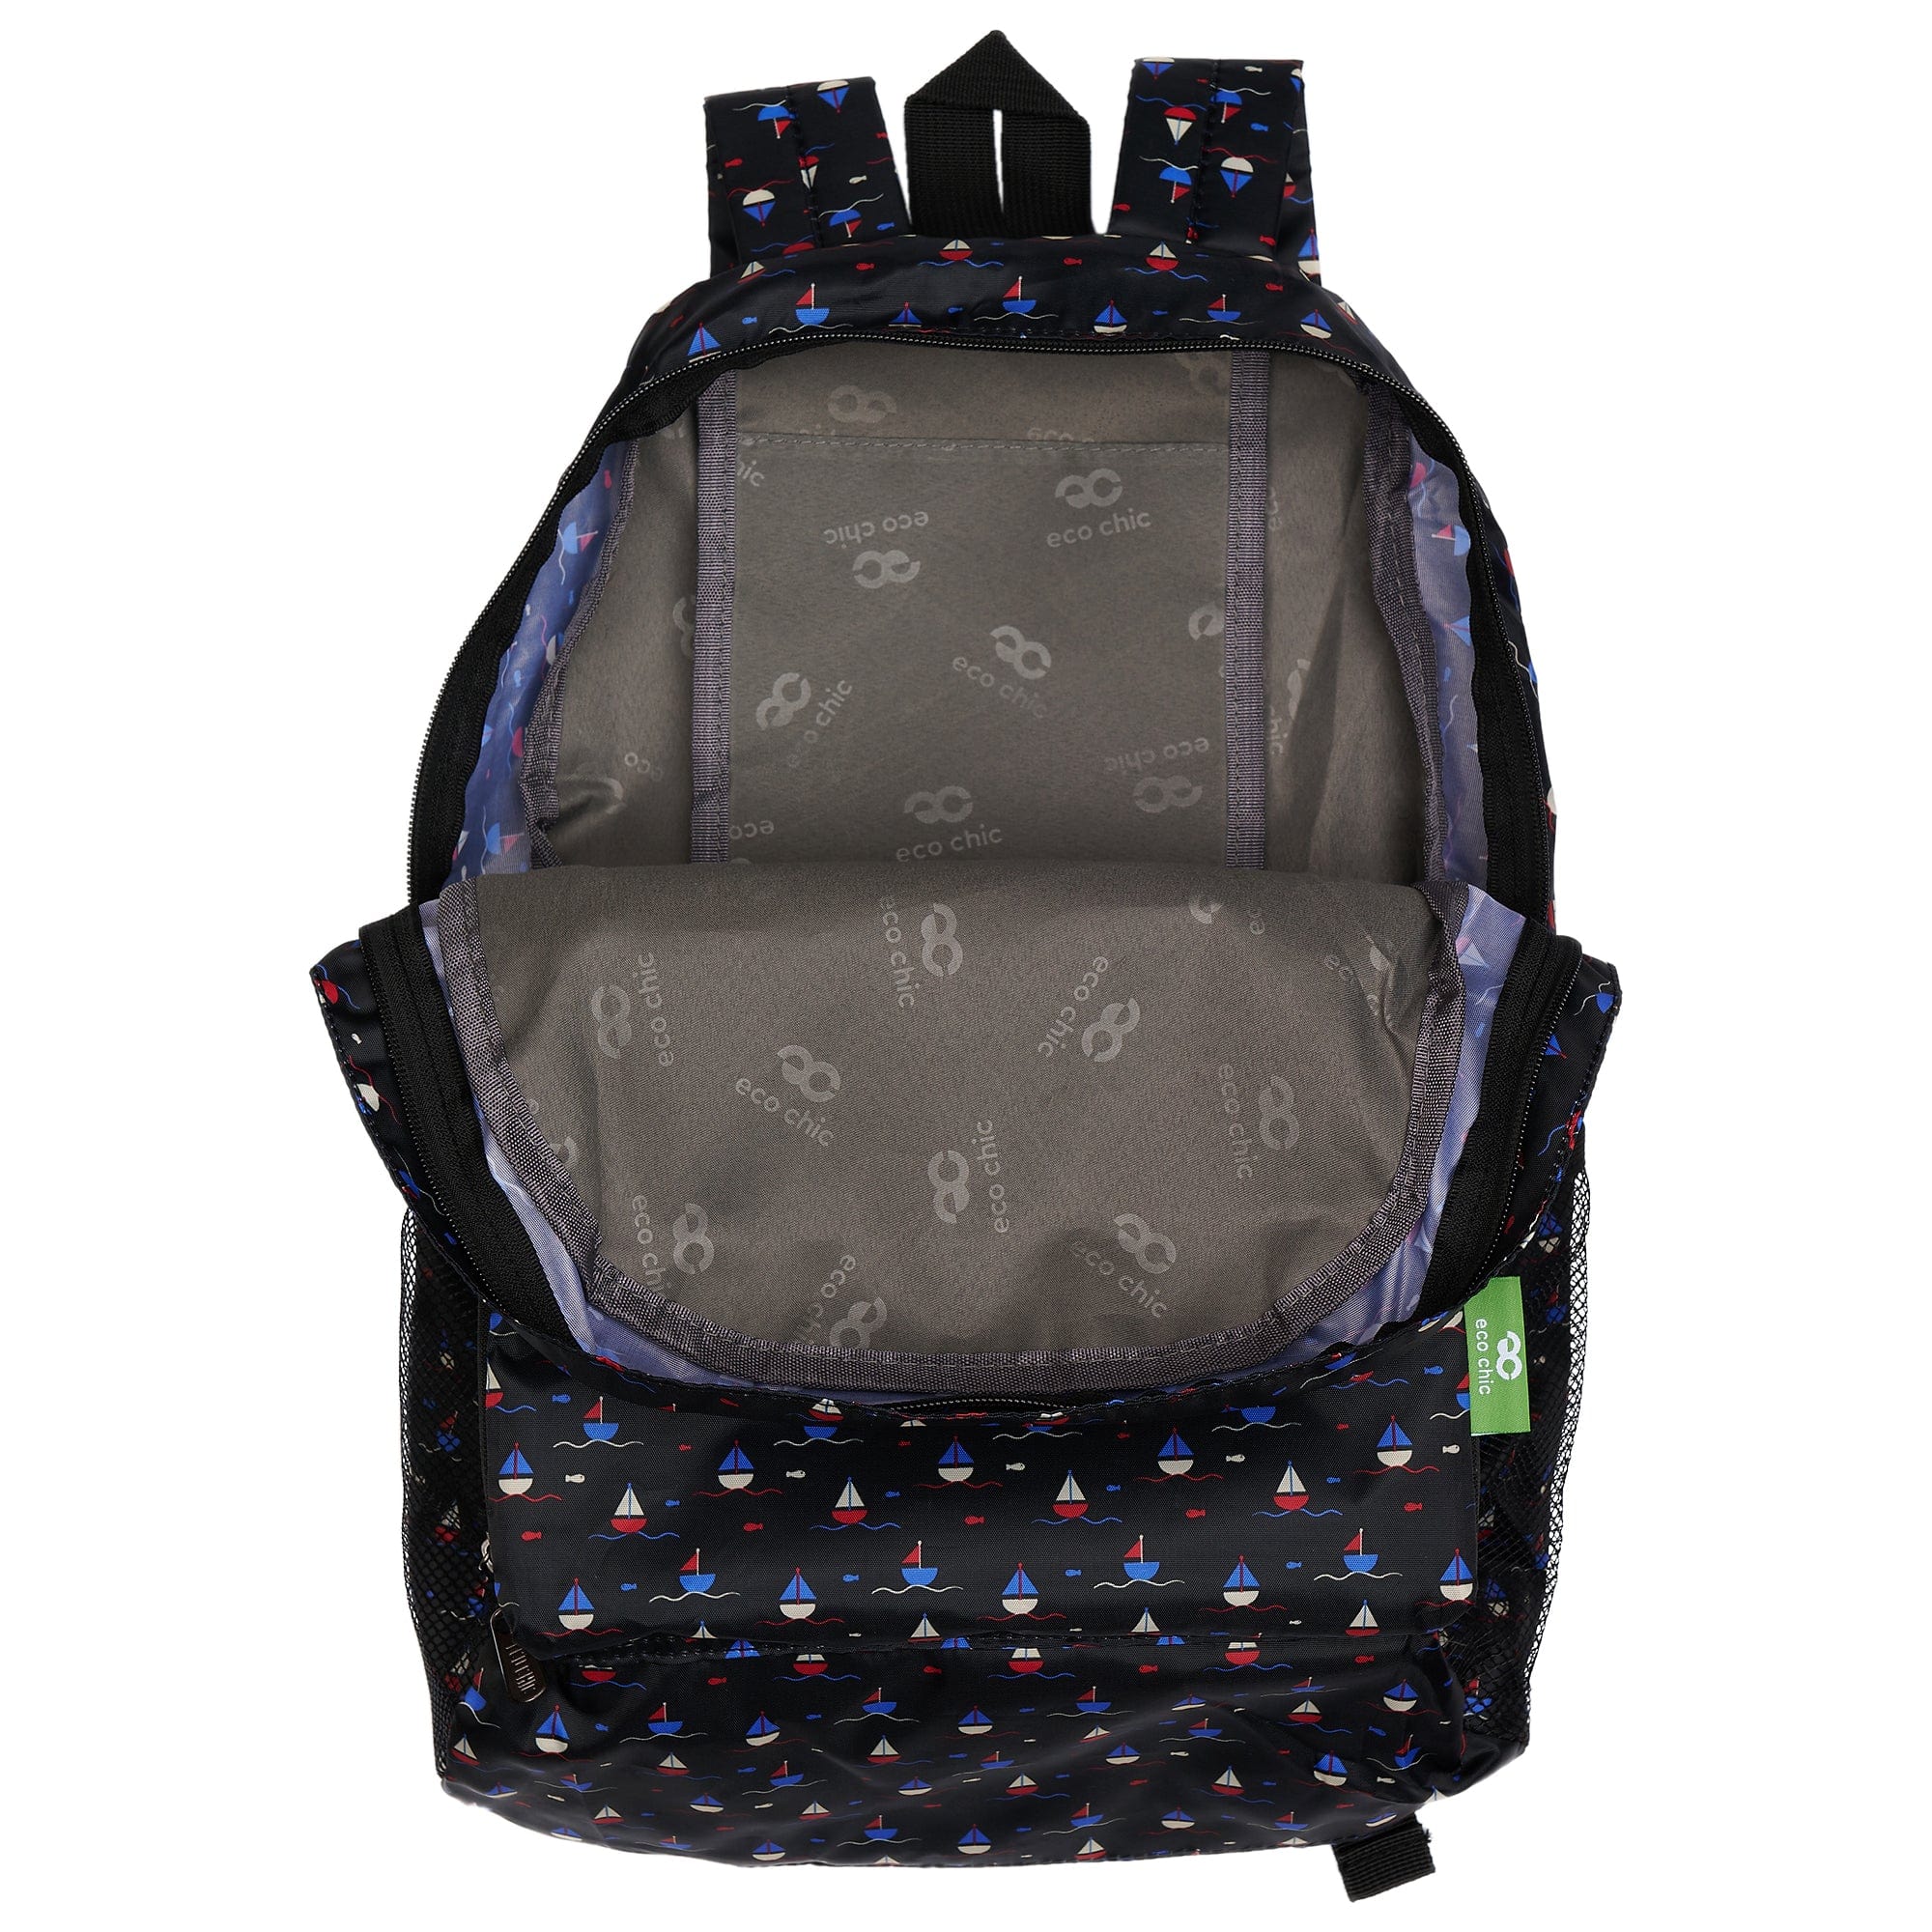 Eco Chic Navy Eco Chic Lightweight Foldable Backpack Yachts